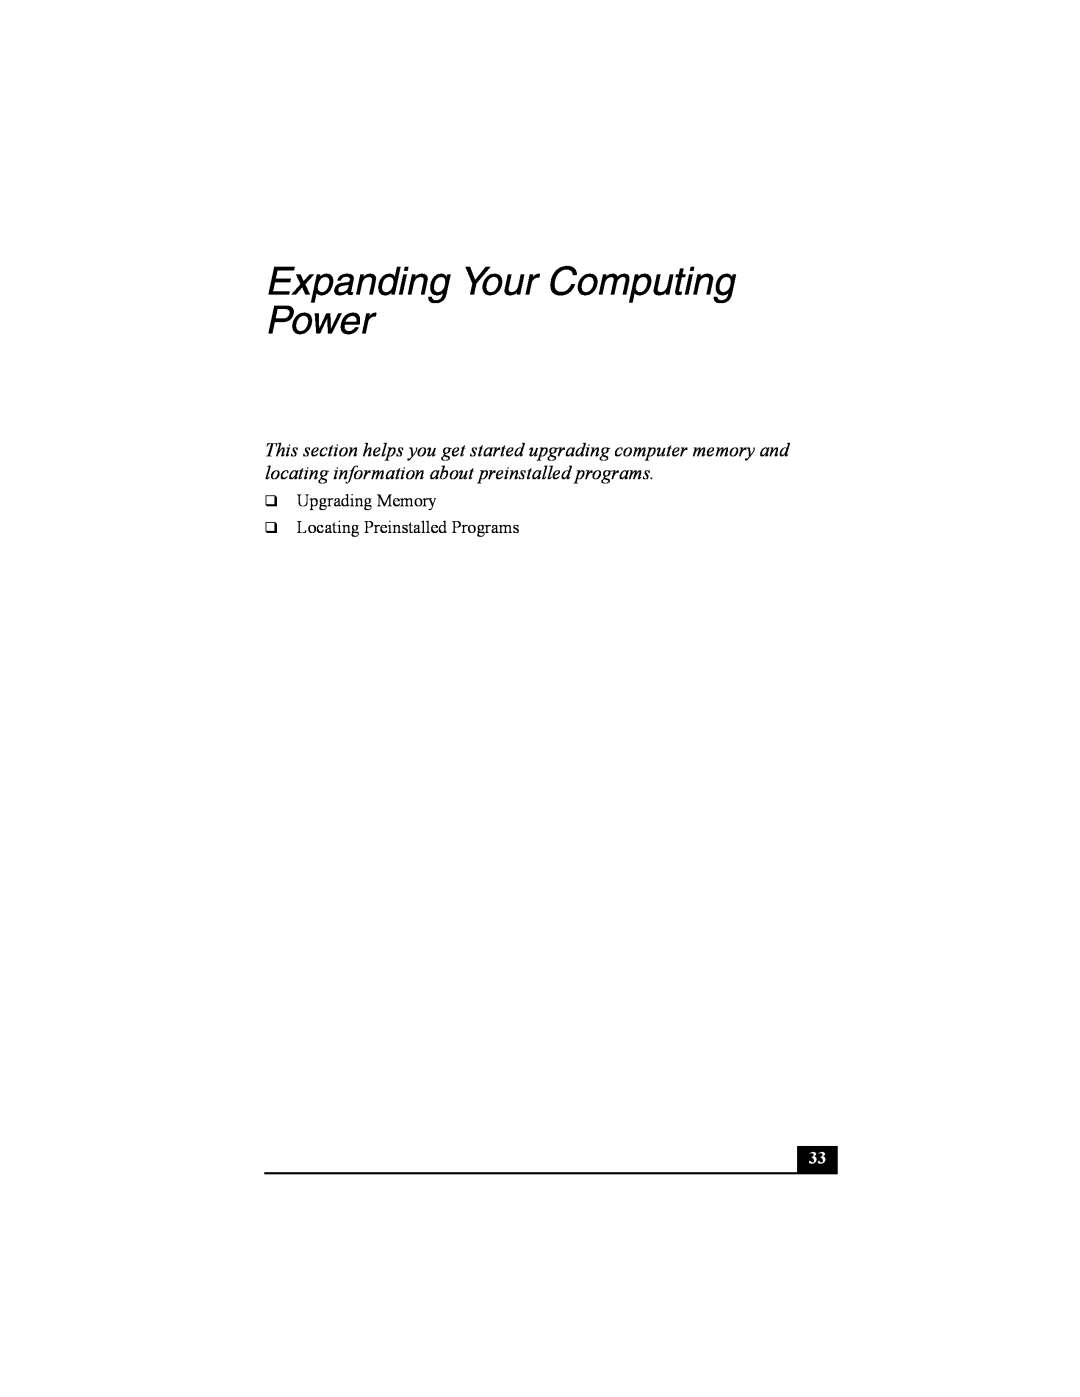 Sony PCG-FRV manual Expanding Your Computing Power, Upgrading Memory Locating Preinstalled Programs 